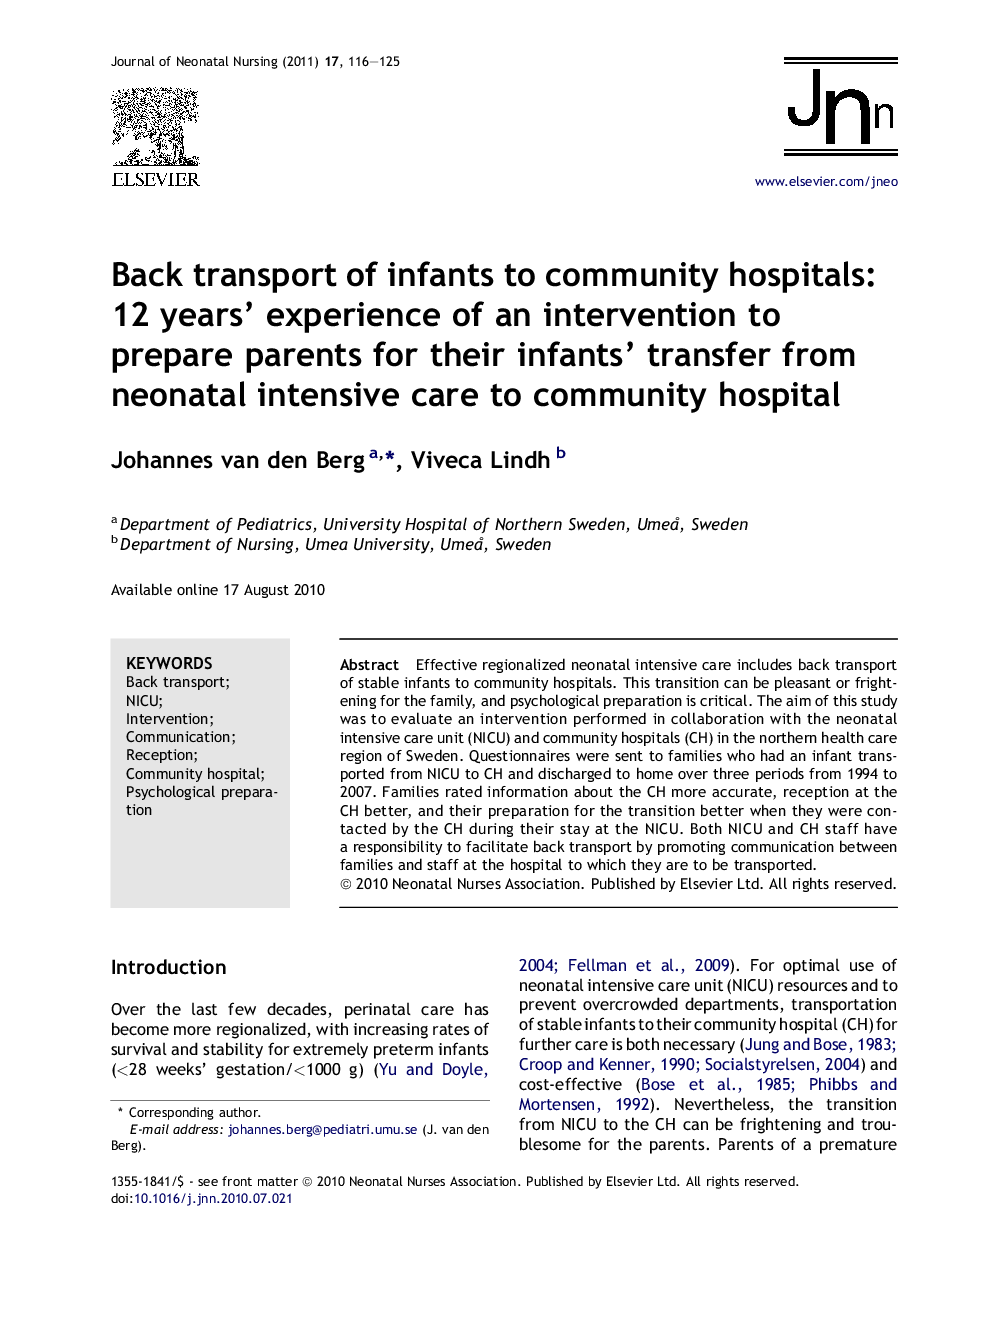 Back transport of infants to community hospitals: 12 years’ experience of an intervention to prepare parents for their infants’ transfer from neonatal intensive care to community hospital